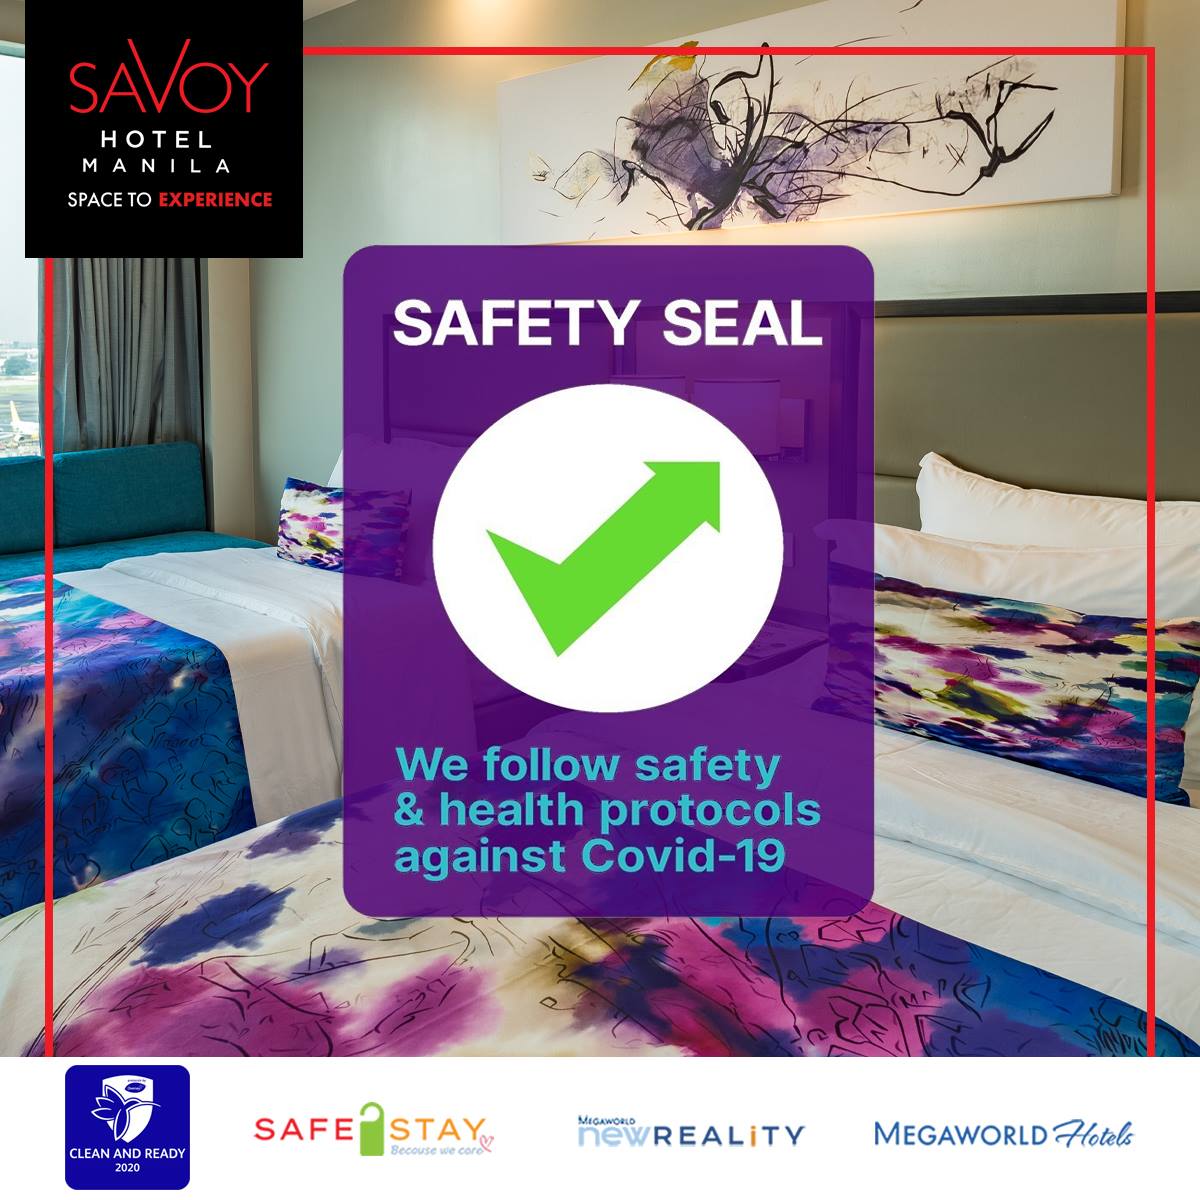 Savoy Hotel Manila has been granted the Safety Seal by the Department of Tourism (DOT)!